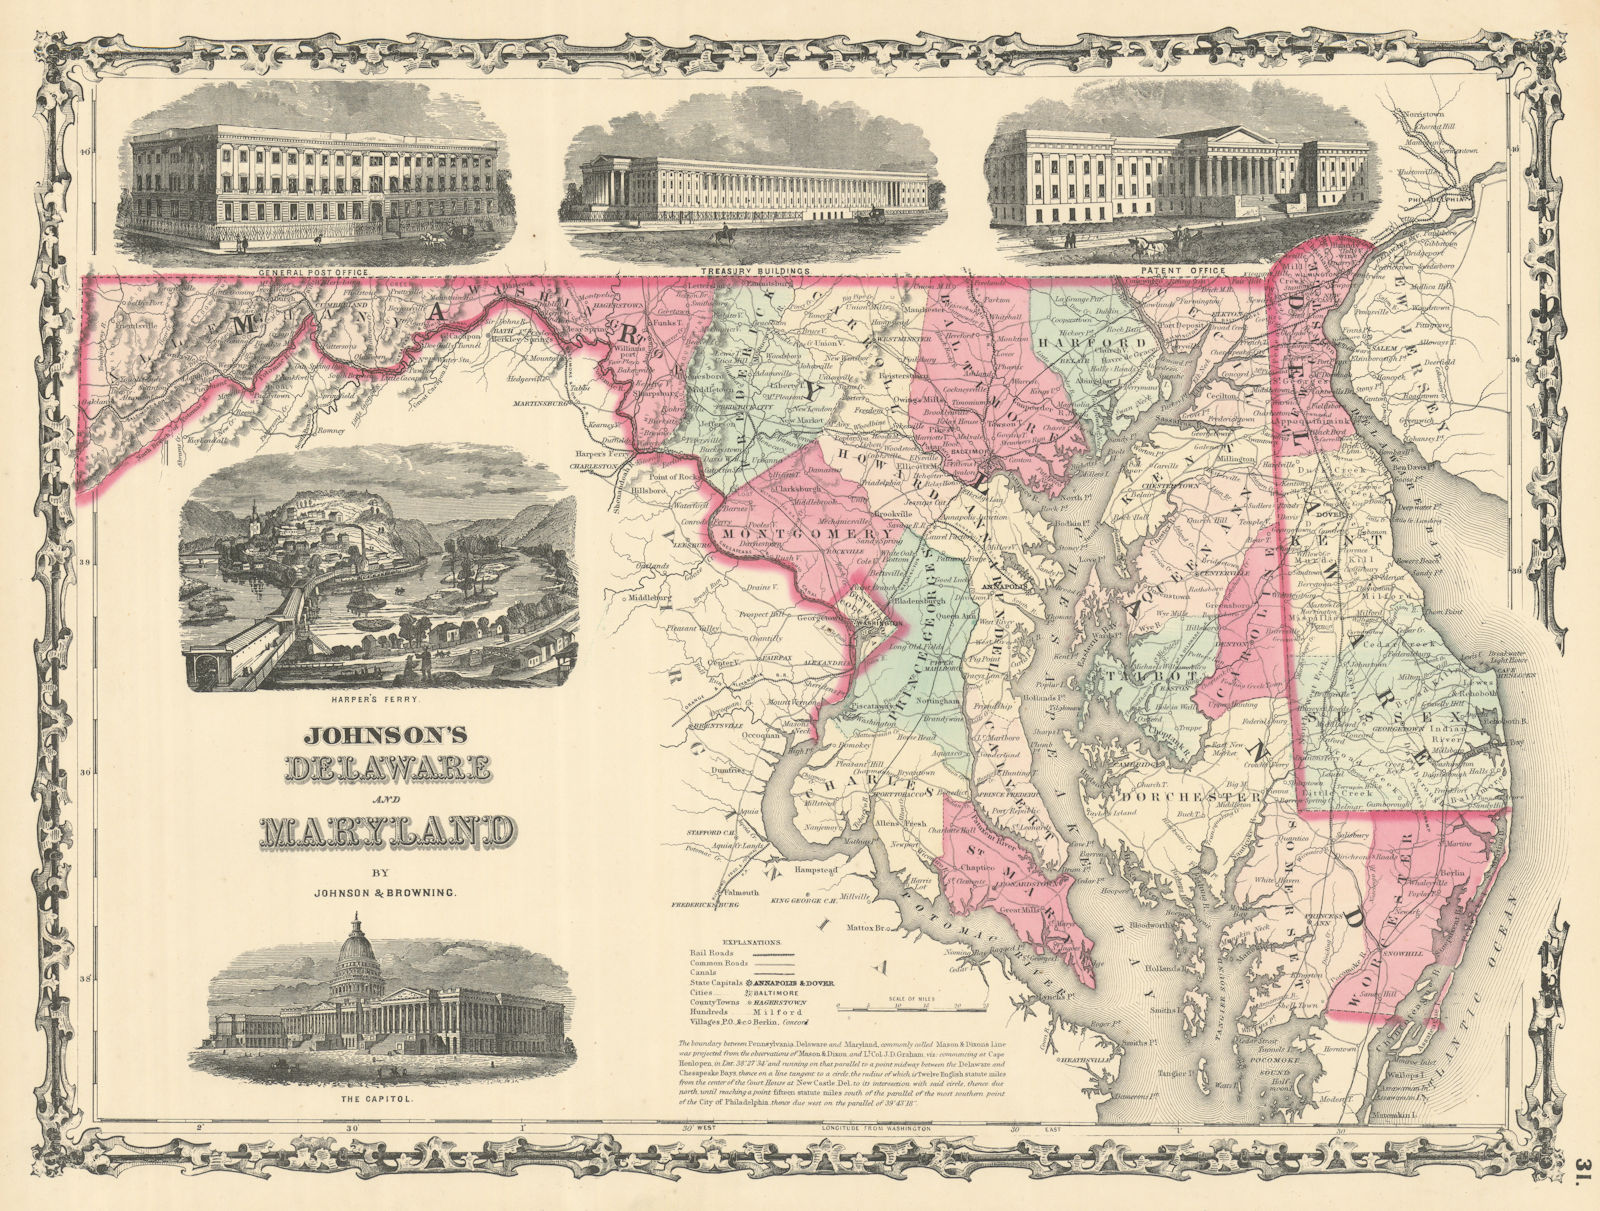 Associate Product Johnson's Delaware & Maryland. District of Columbia. Counties 1861 old map